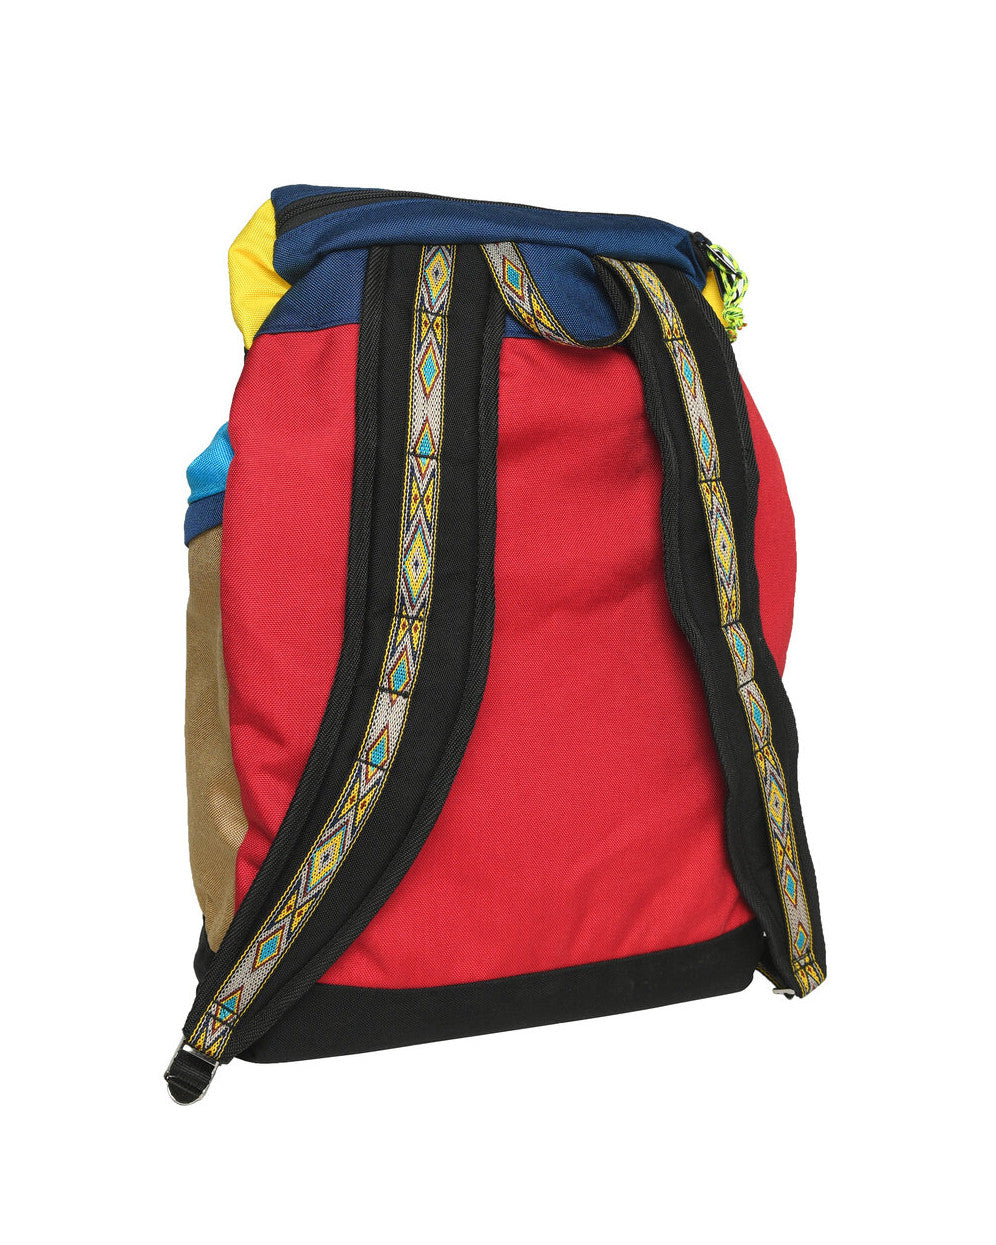 Large Climb Pack - Old Navy / Barn Red